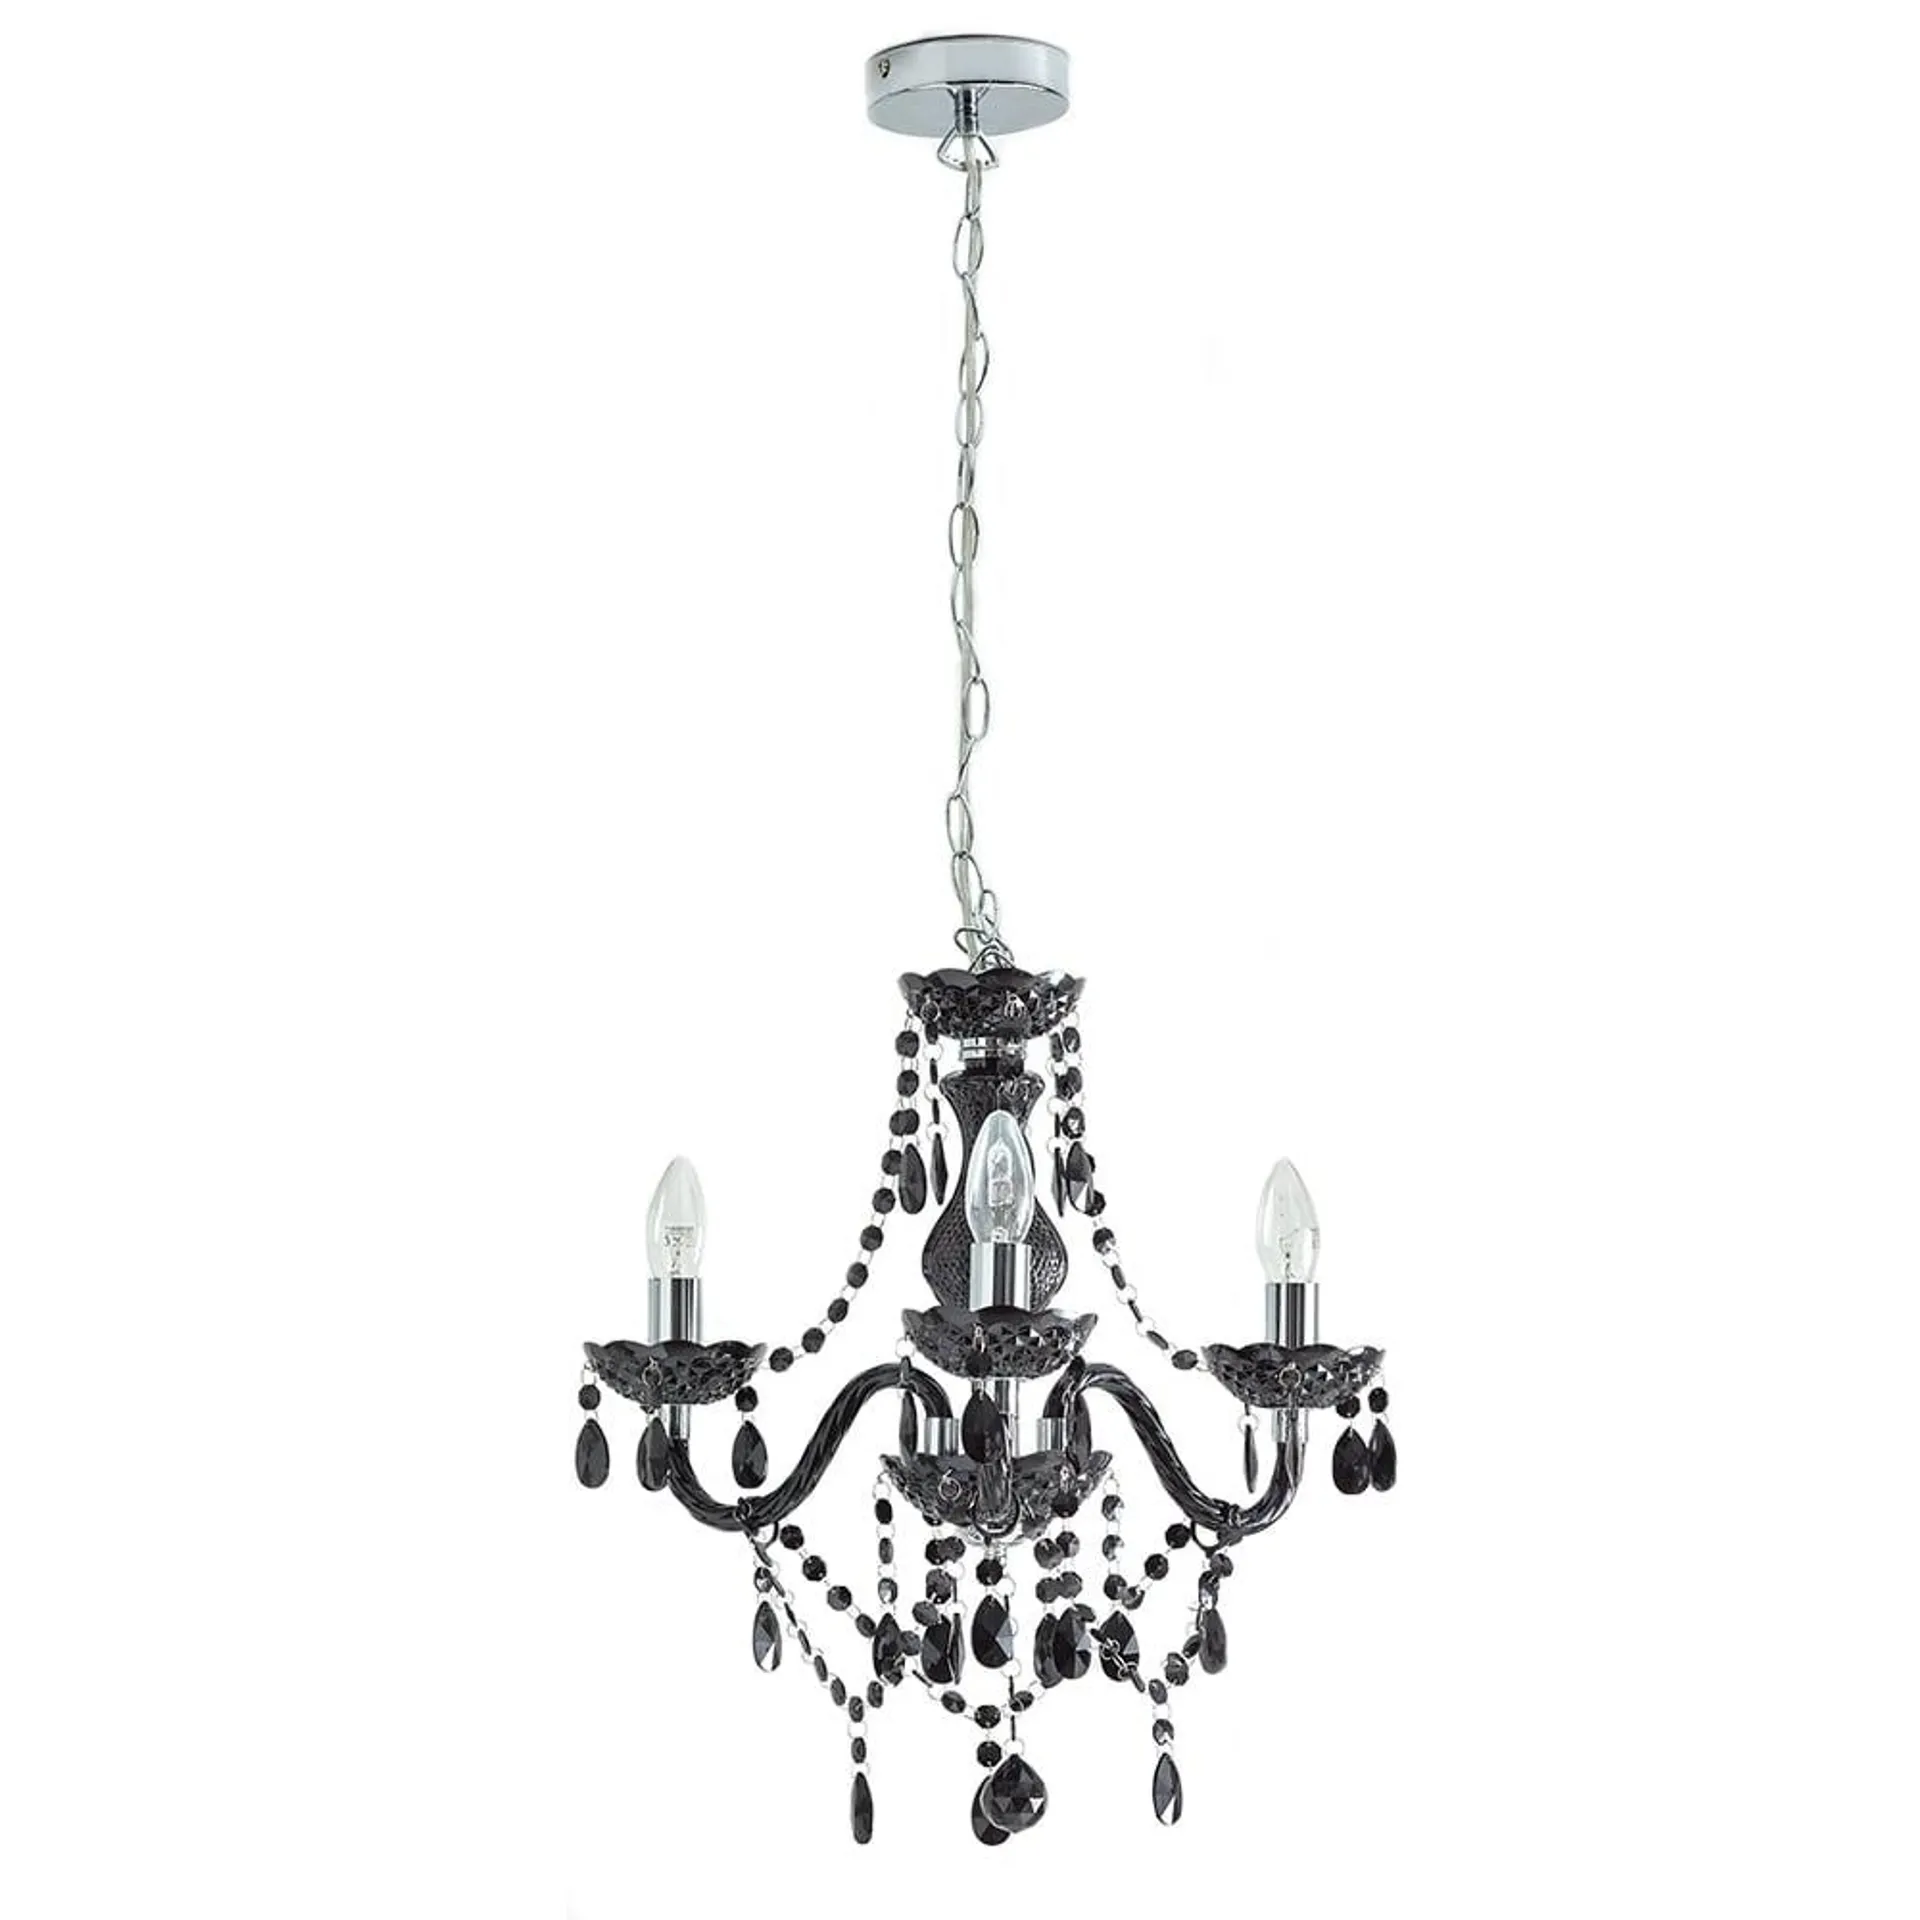 Wilko Marie Therese 3 Arm Black Chandelier Ceiling Light